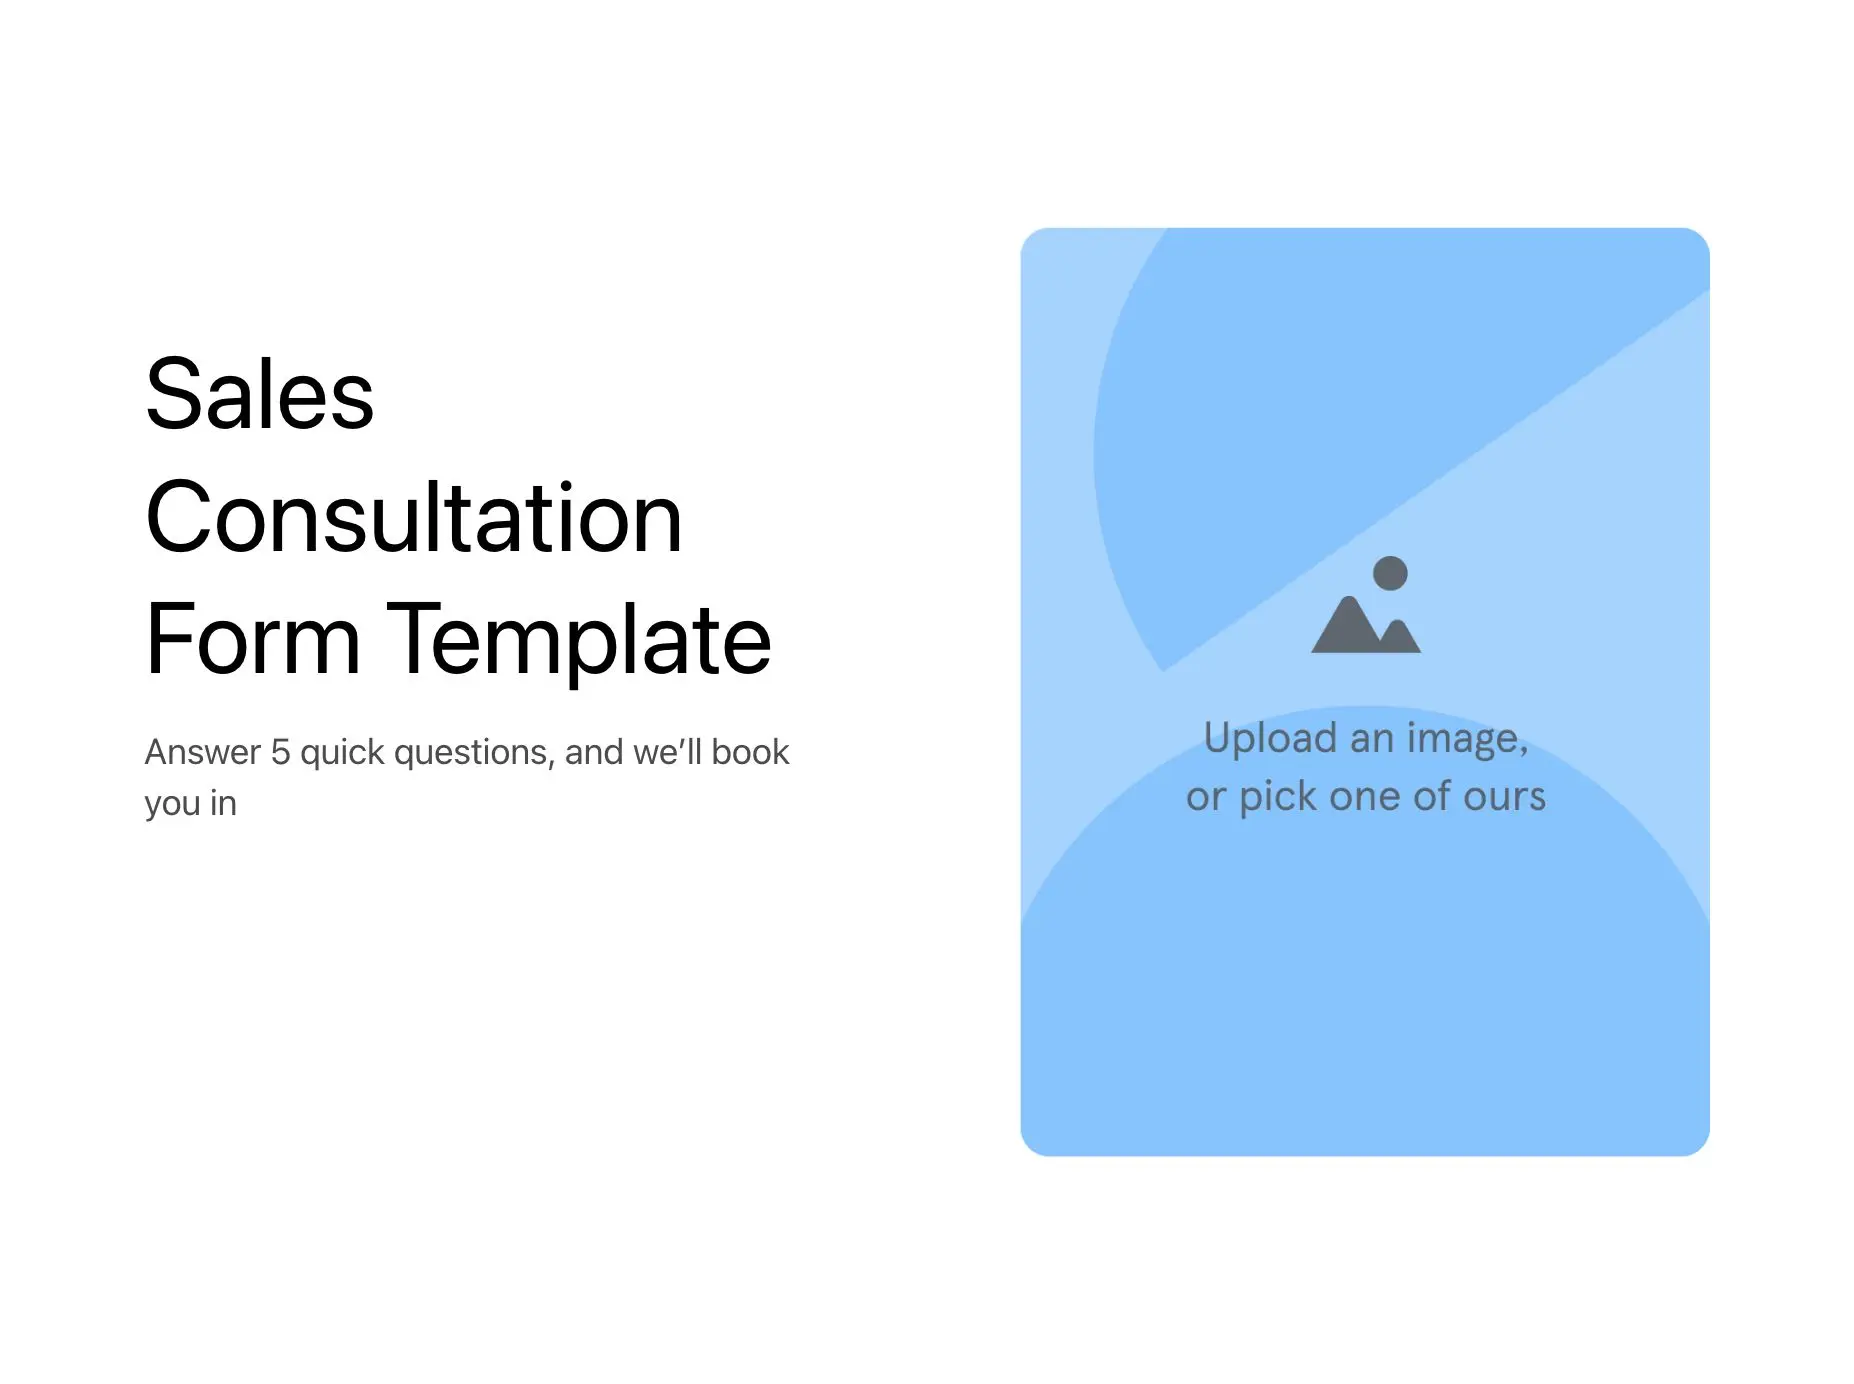 Sales Consultation Form Template Hero